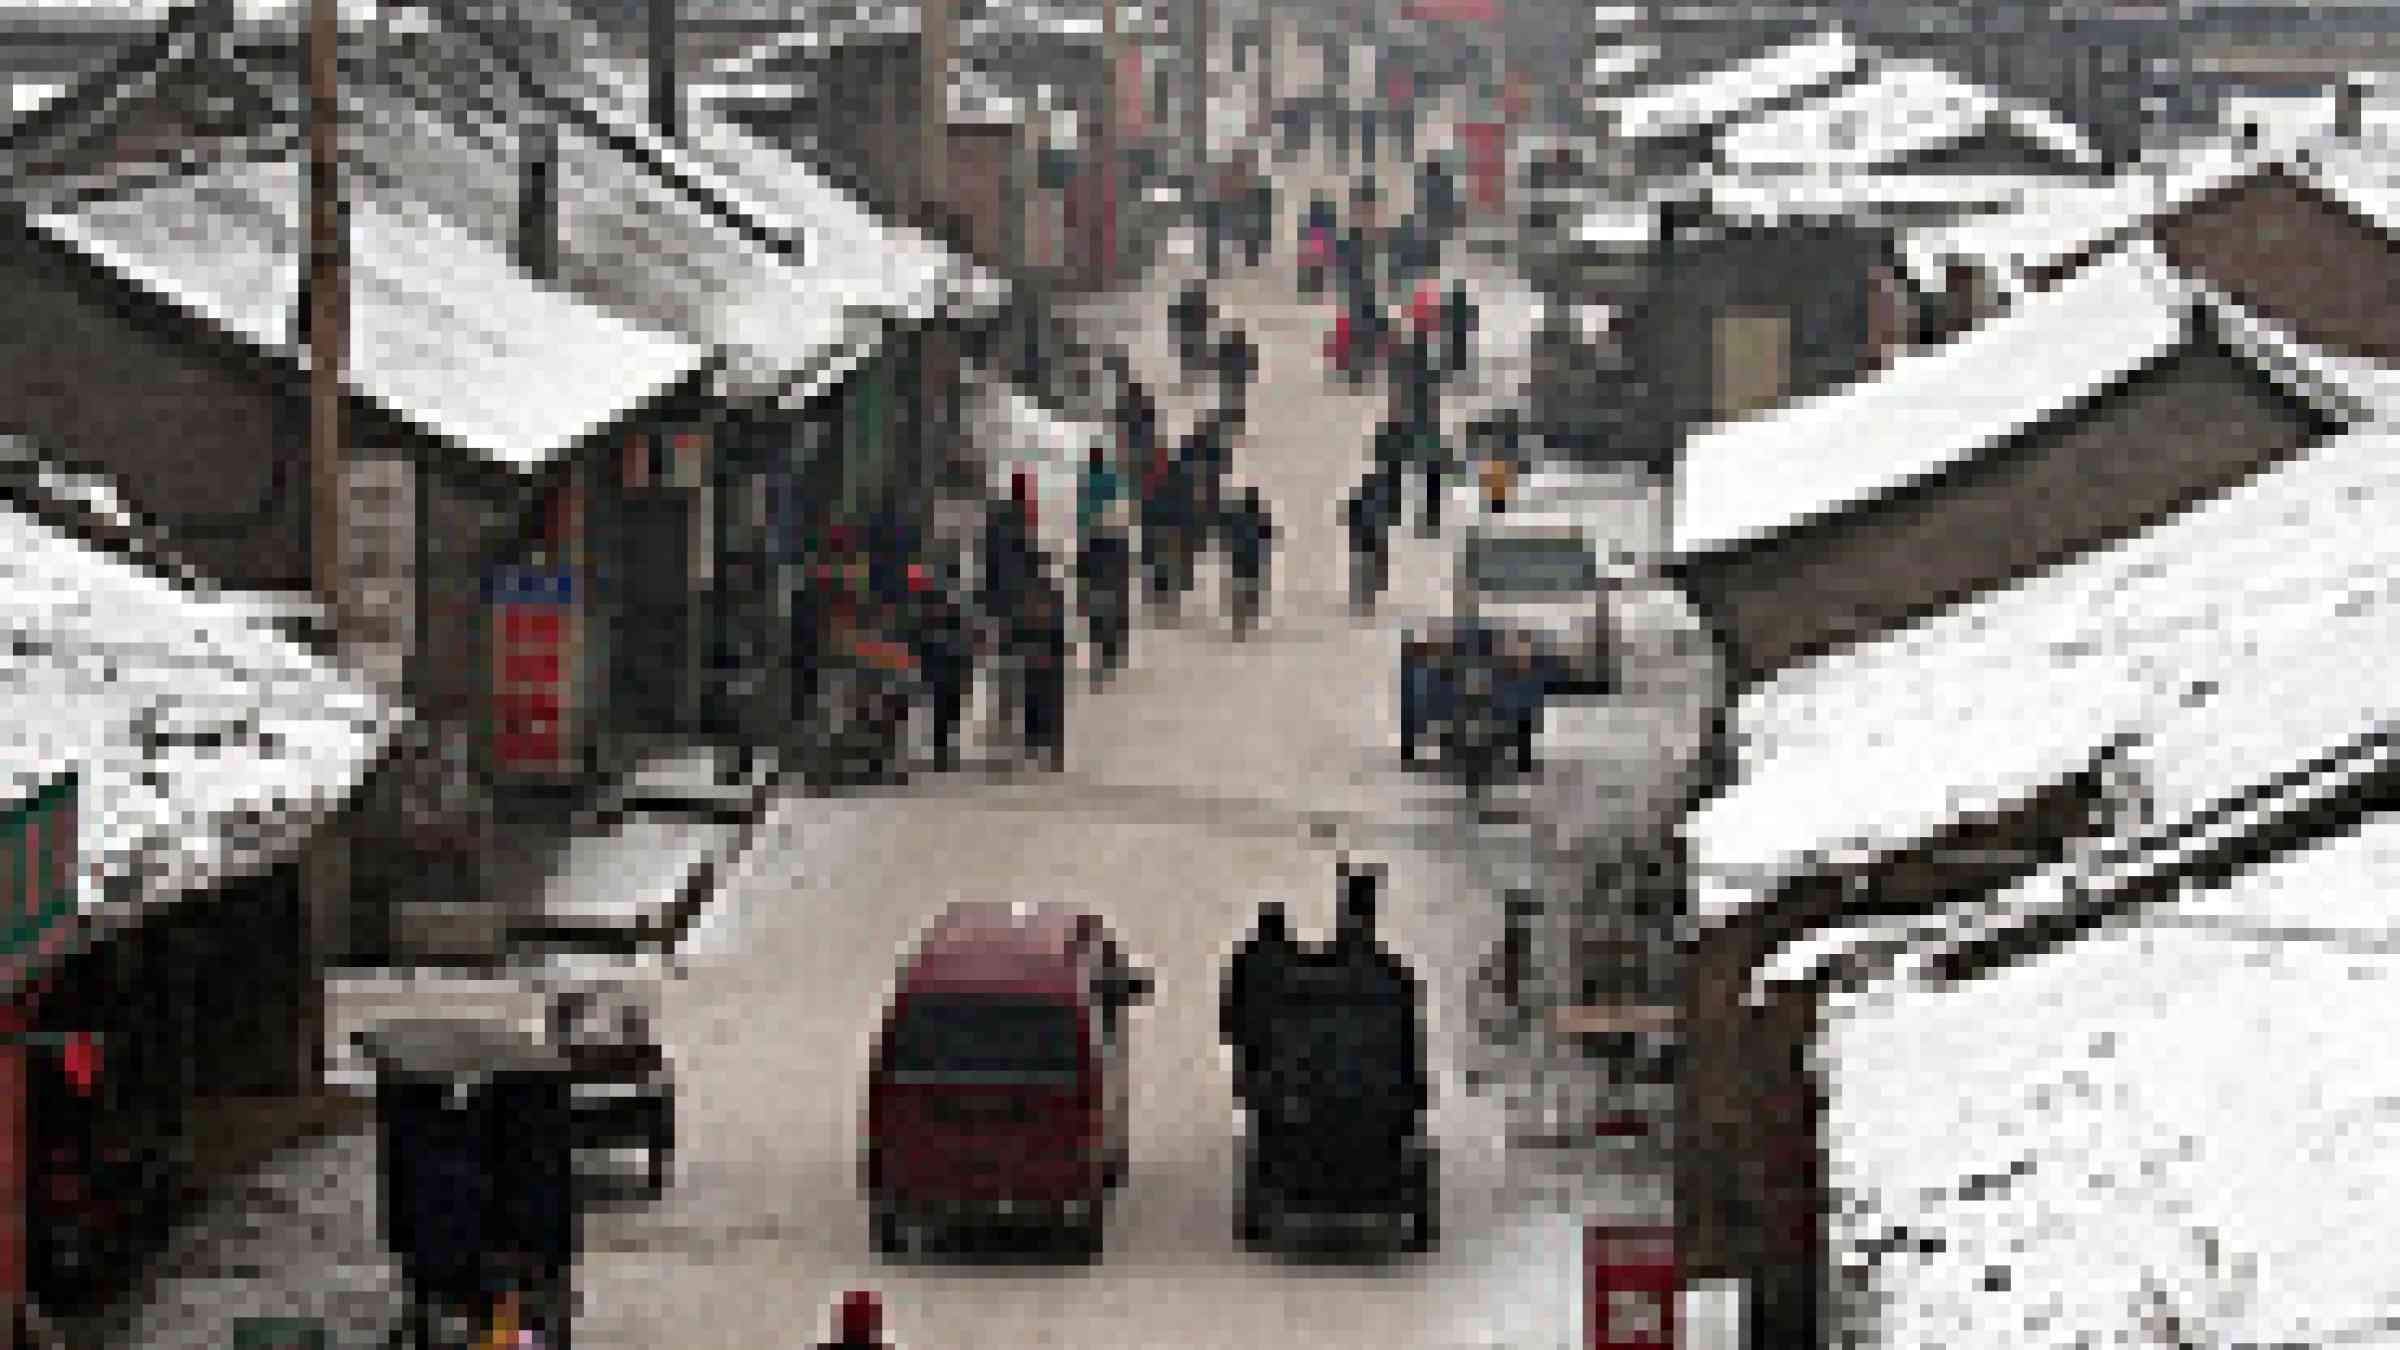 China in the snow, photo by flickr user EmmaJG, Creative Commons Attribution-NonCommercial-NoDerivs 2.0 Generic http://www.flickr.com/photos/emmajg/3172804257